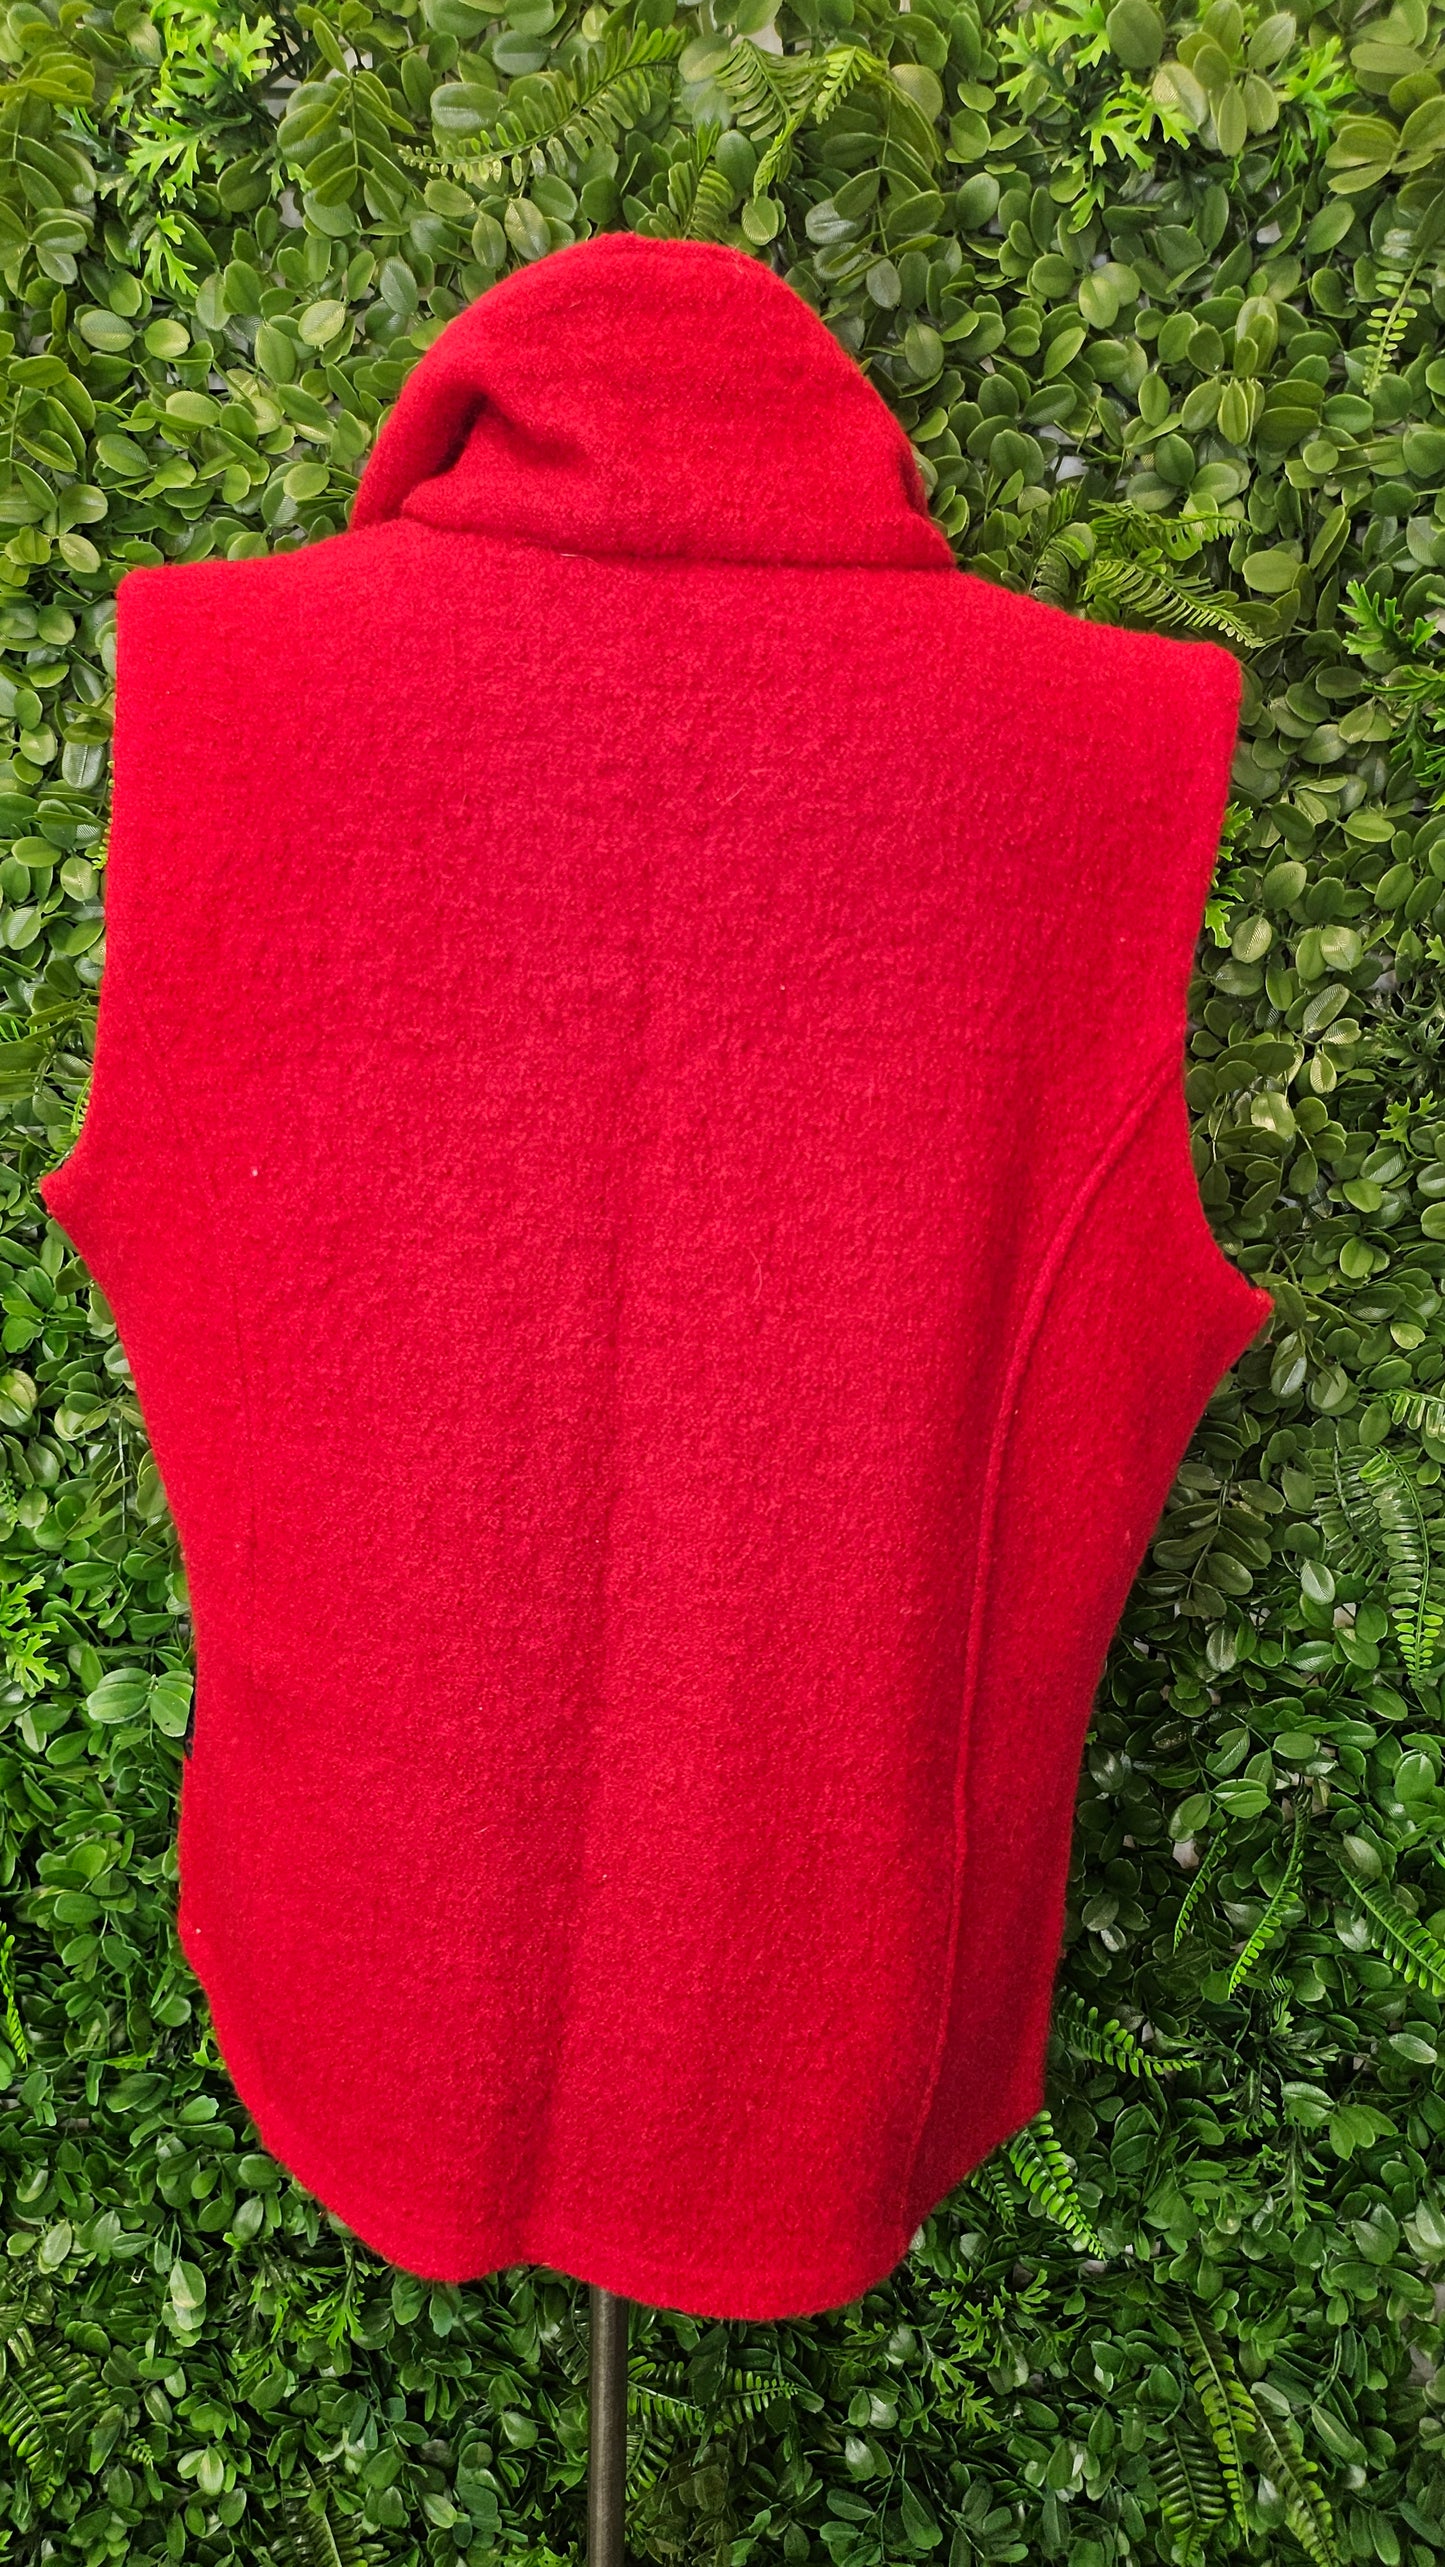 Twin Lakes Red Wool Zipped Vest (12-14)